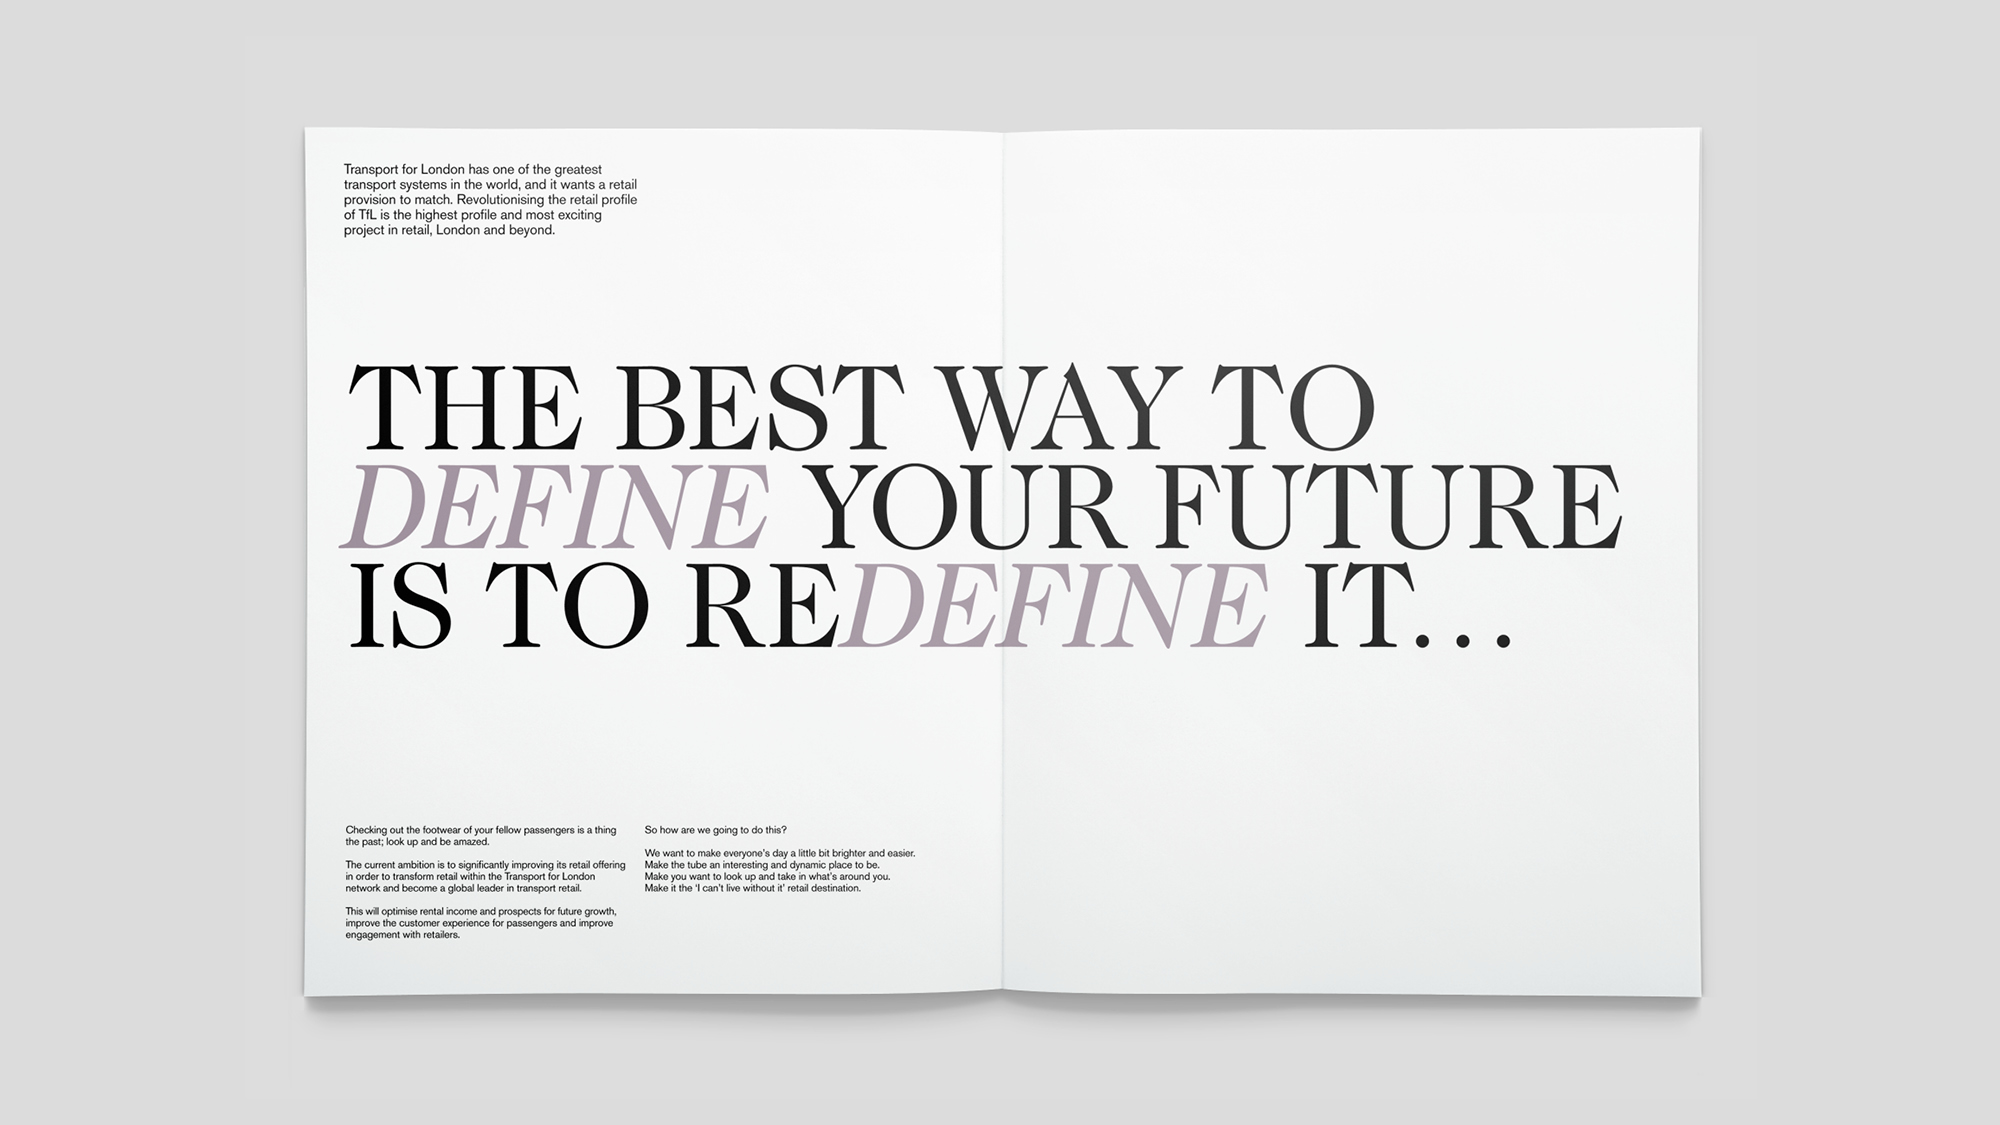 Entity-3-Three-Brand-Design-Agency-Sydney-Transport-for-London-Vision-6-experience-print-book-spread-type